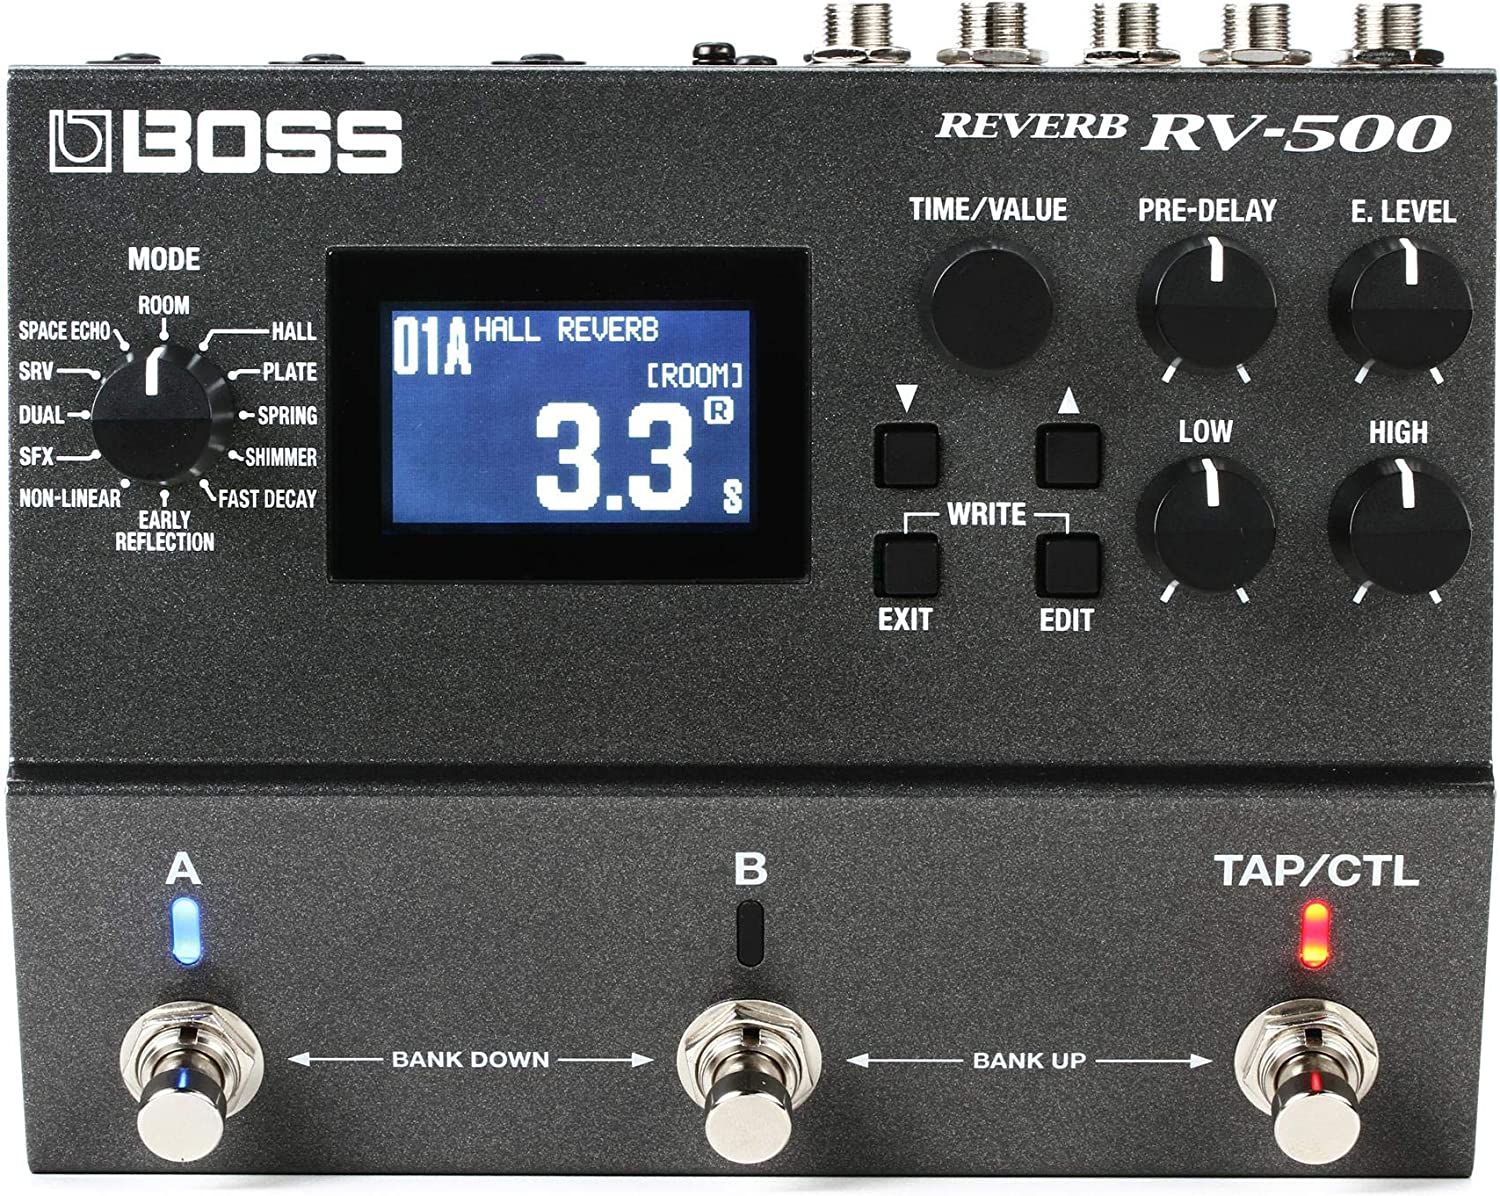 Boss RV-500 Reverb Pedal on a white background